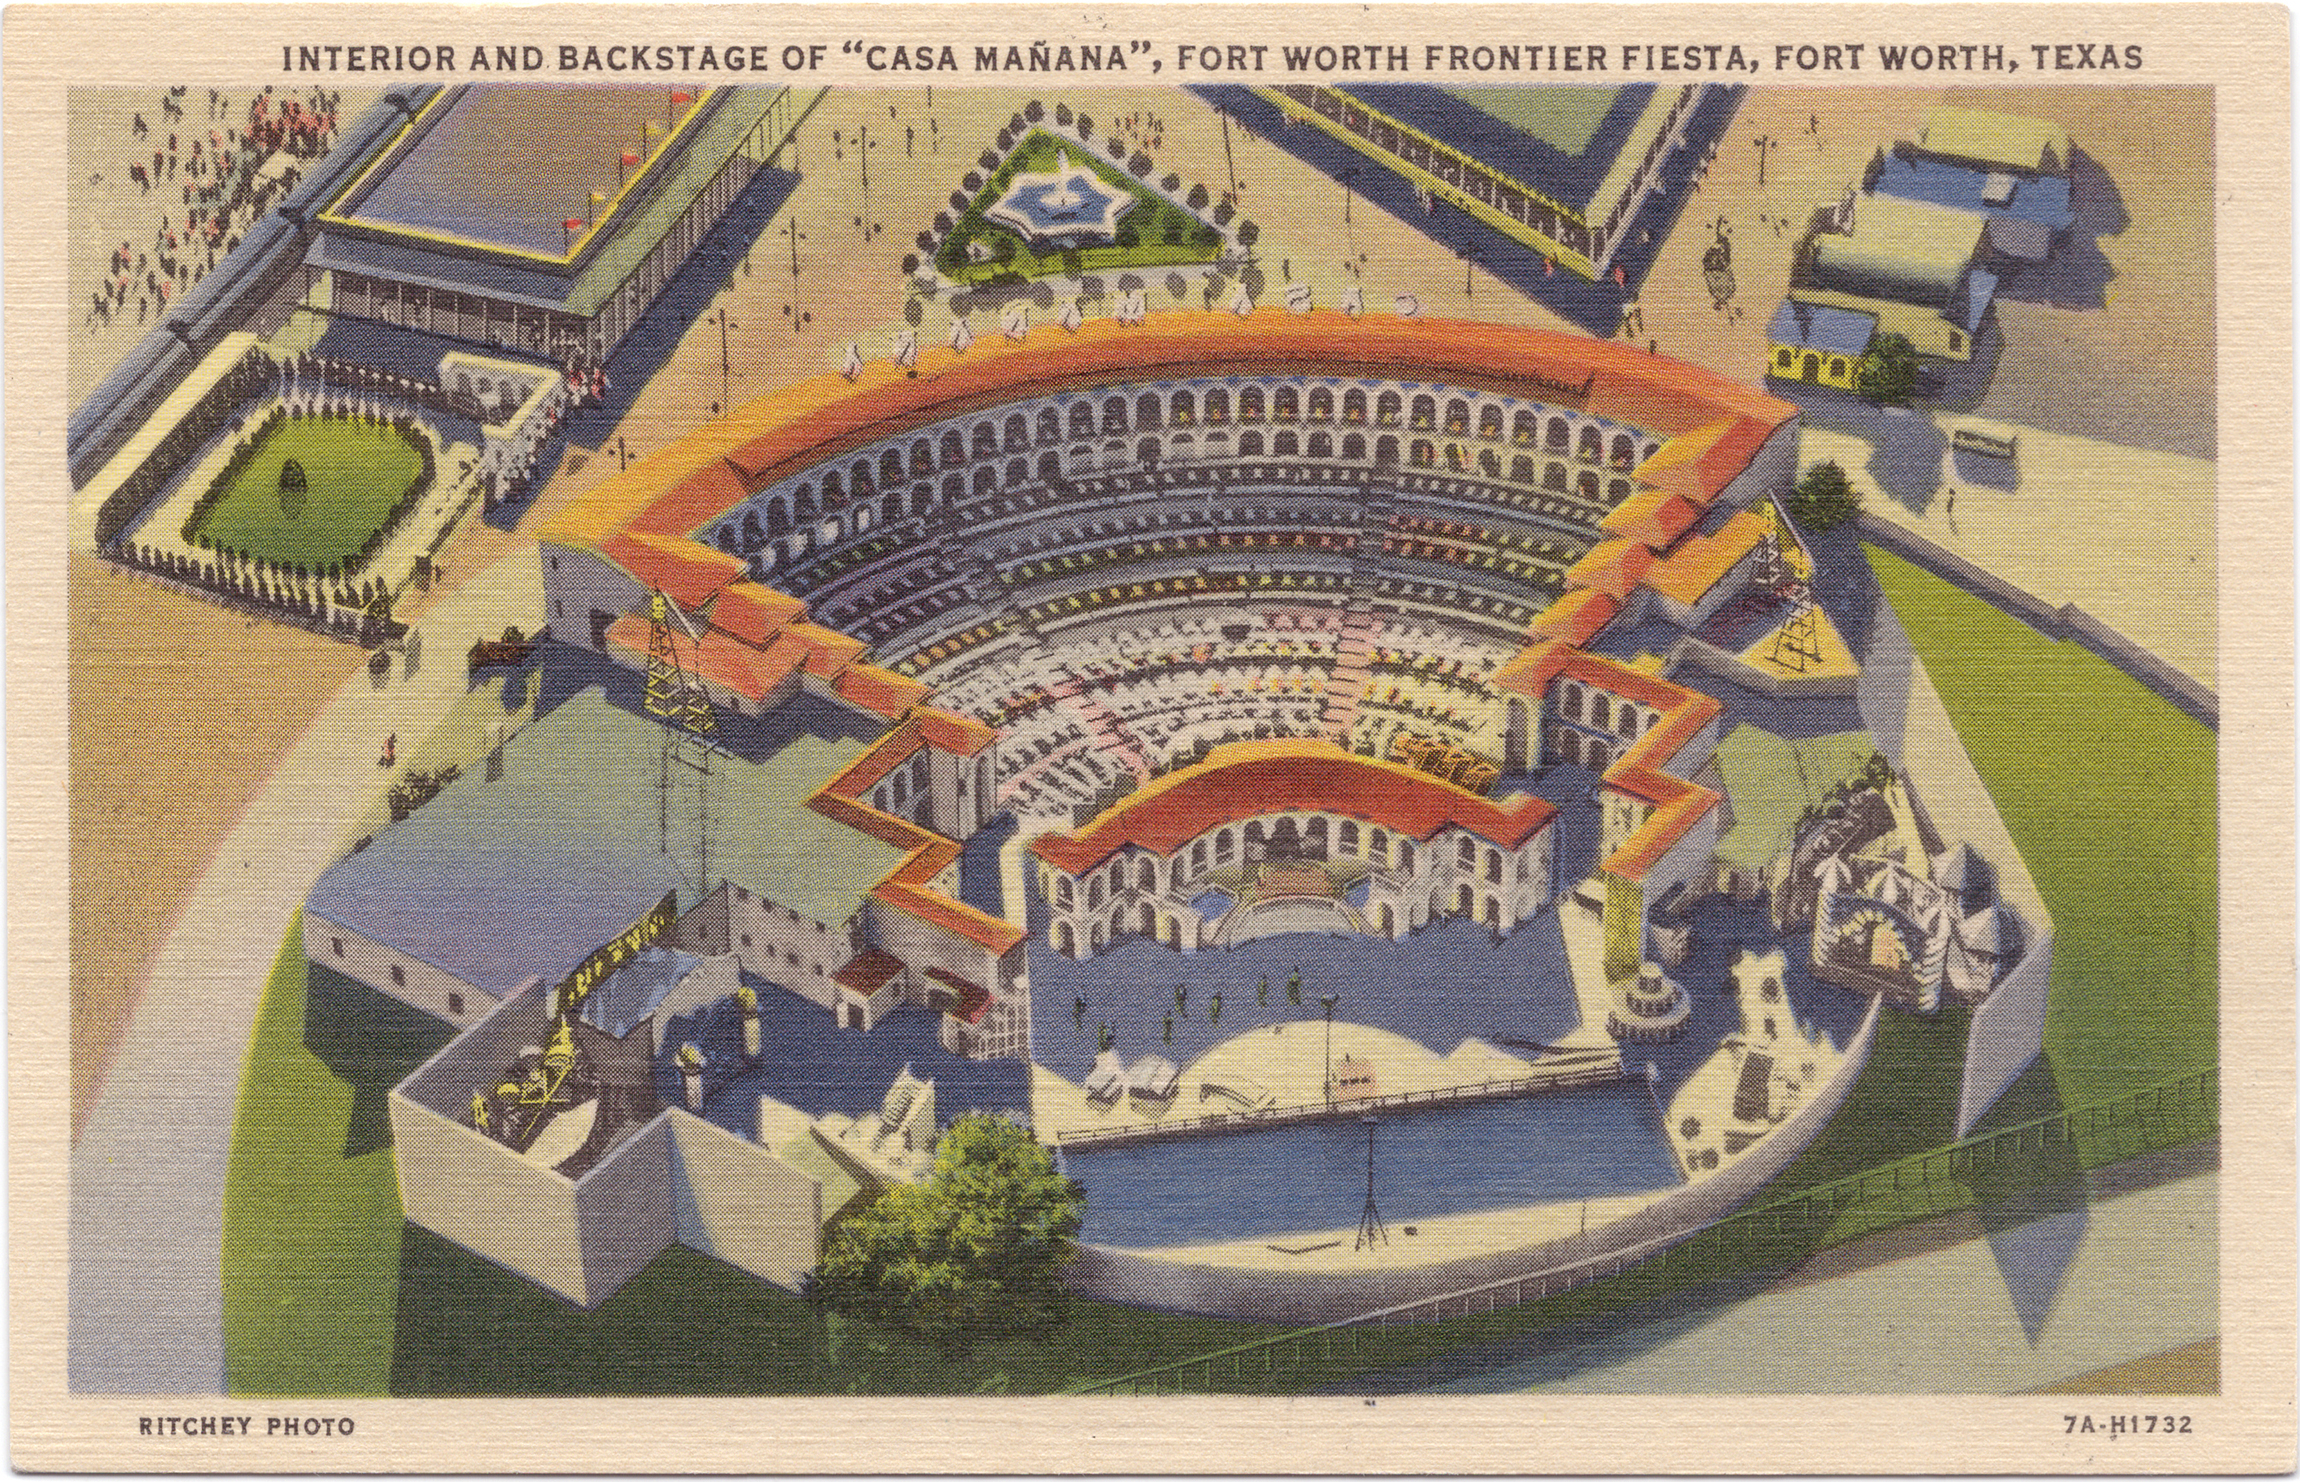 The postcard features a drawing of an aerial view of the building.